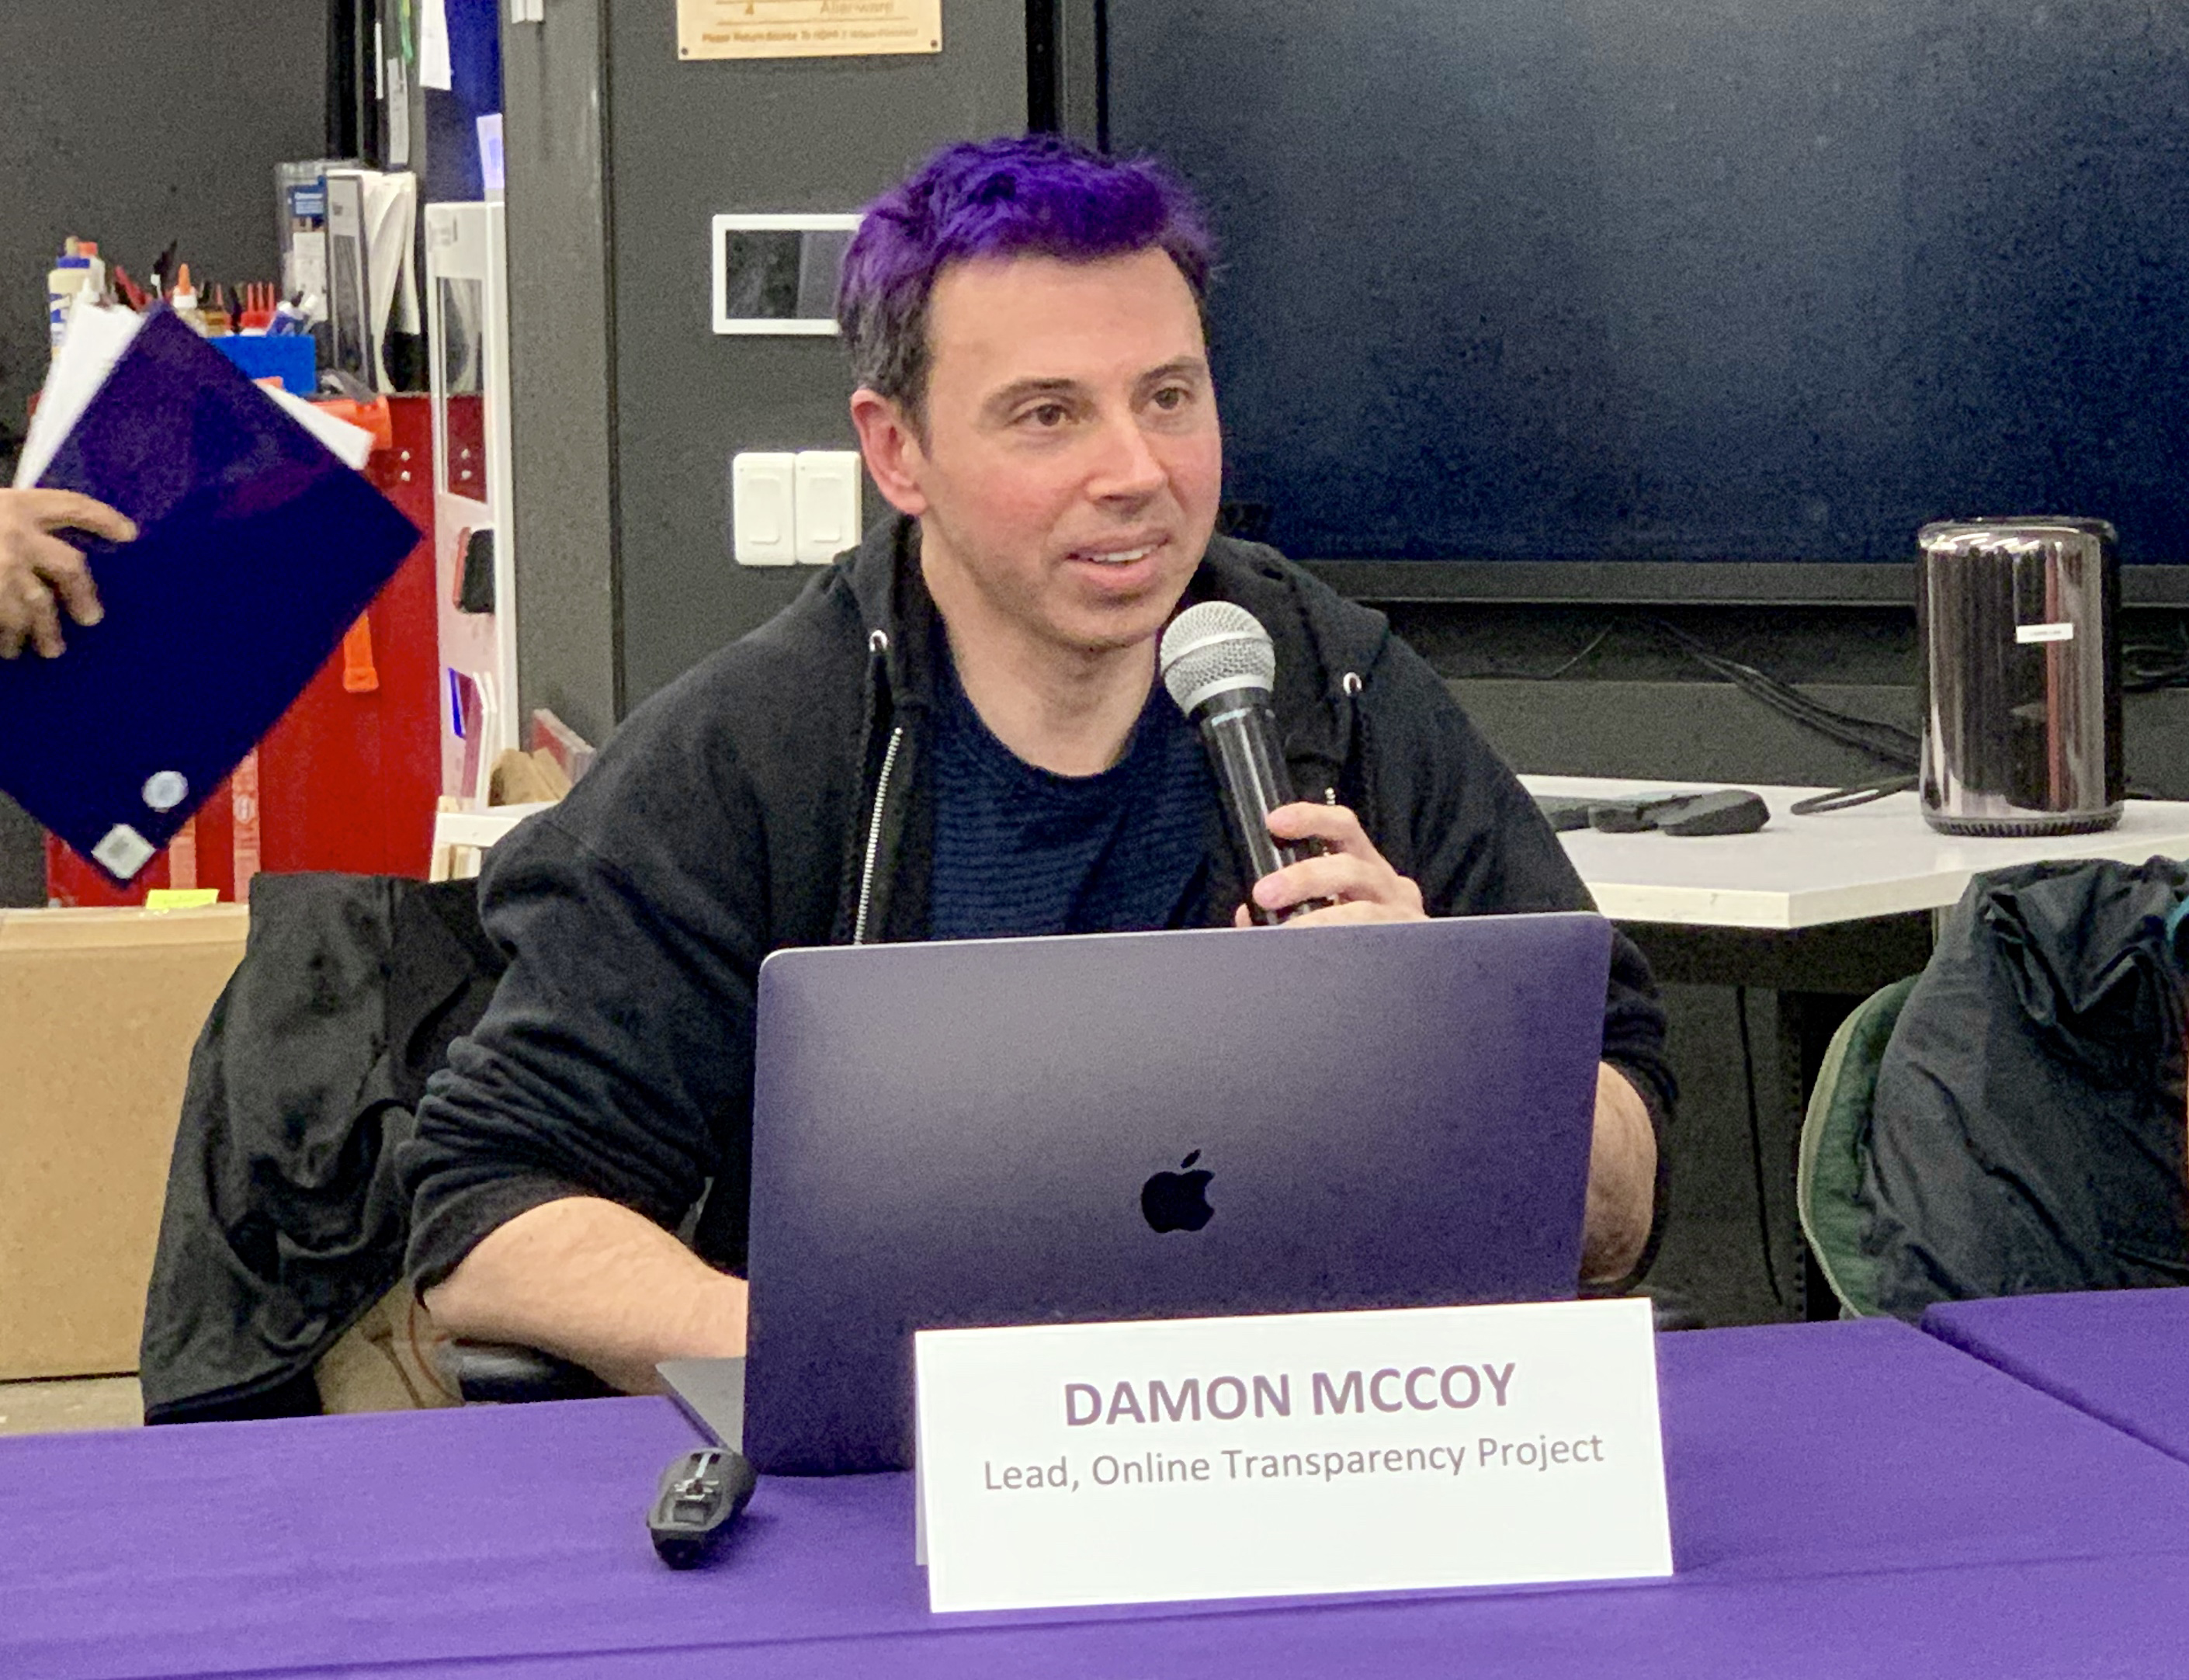 Damon McCoy, assistant professor in the Department of Computer Science and Engineering at NYU Tandon, at a recent Cybersecurity Media Roundtable. Eagle photo by Mary Frost